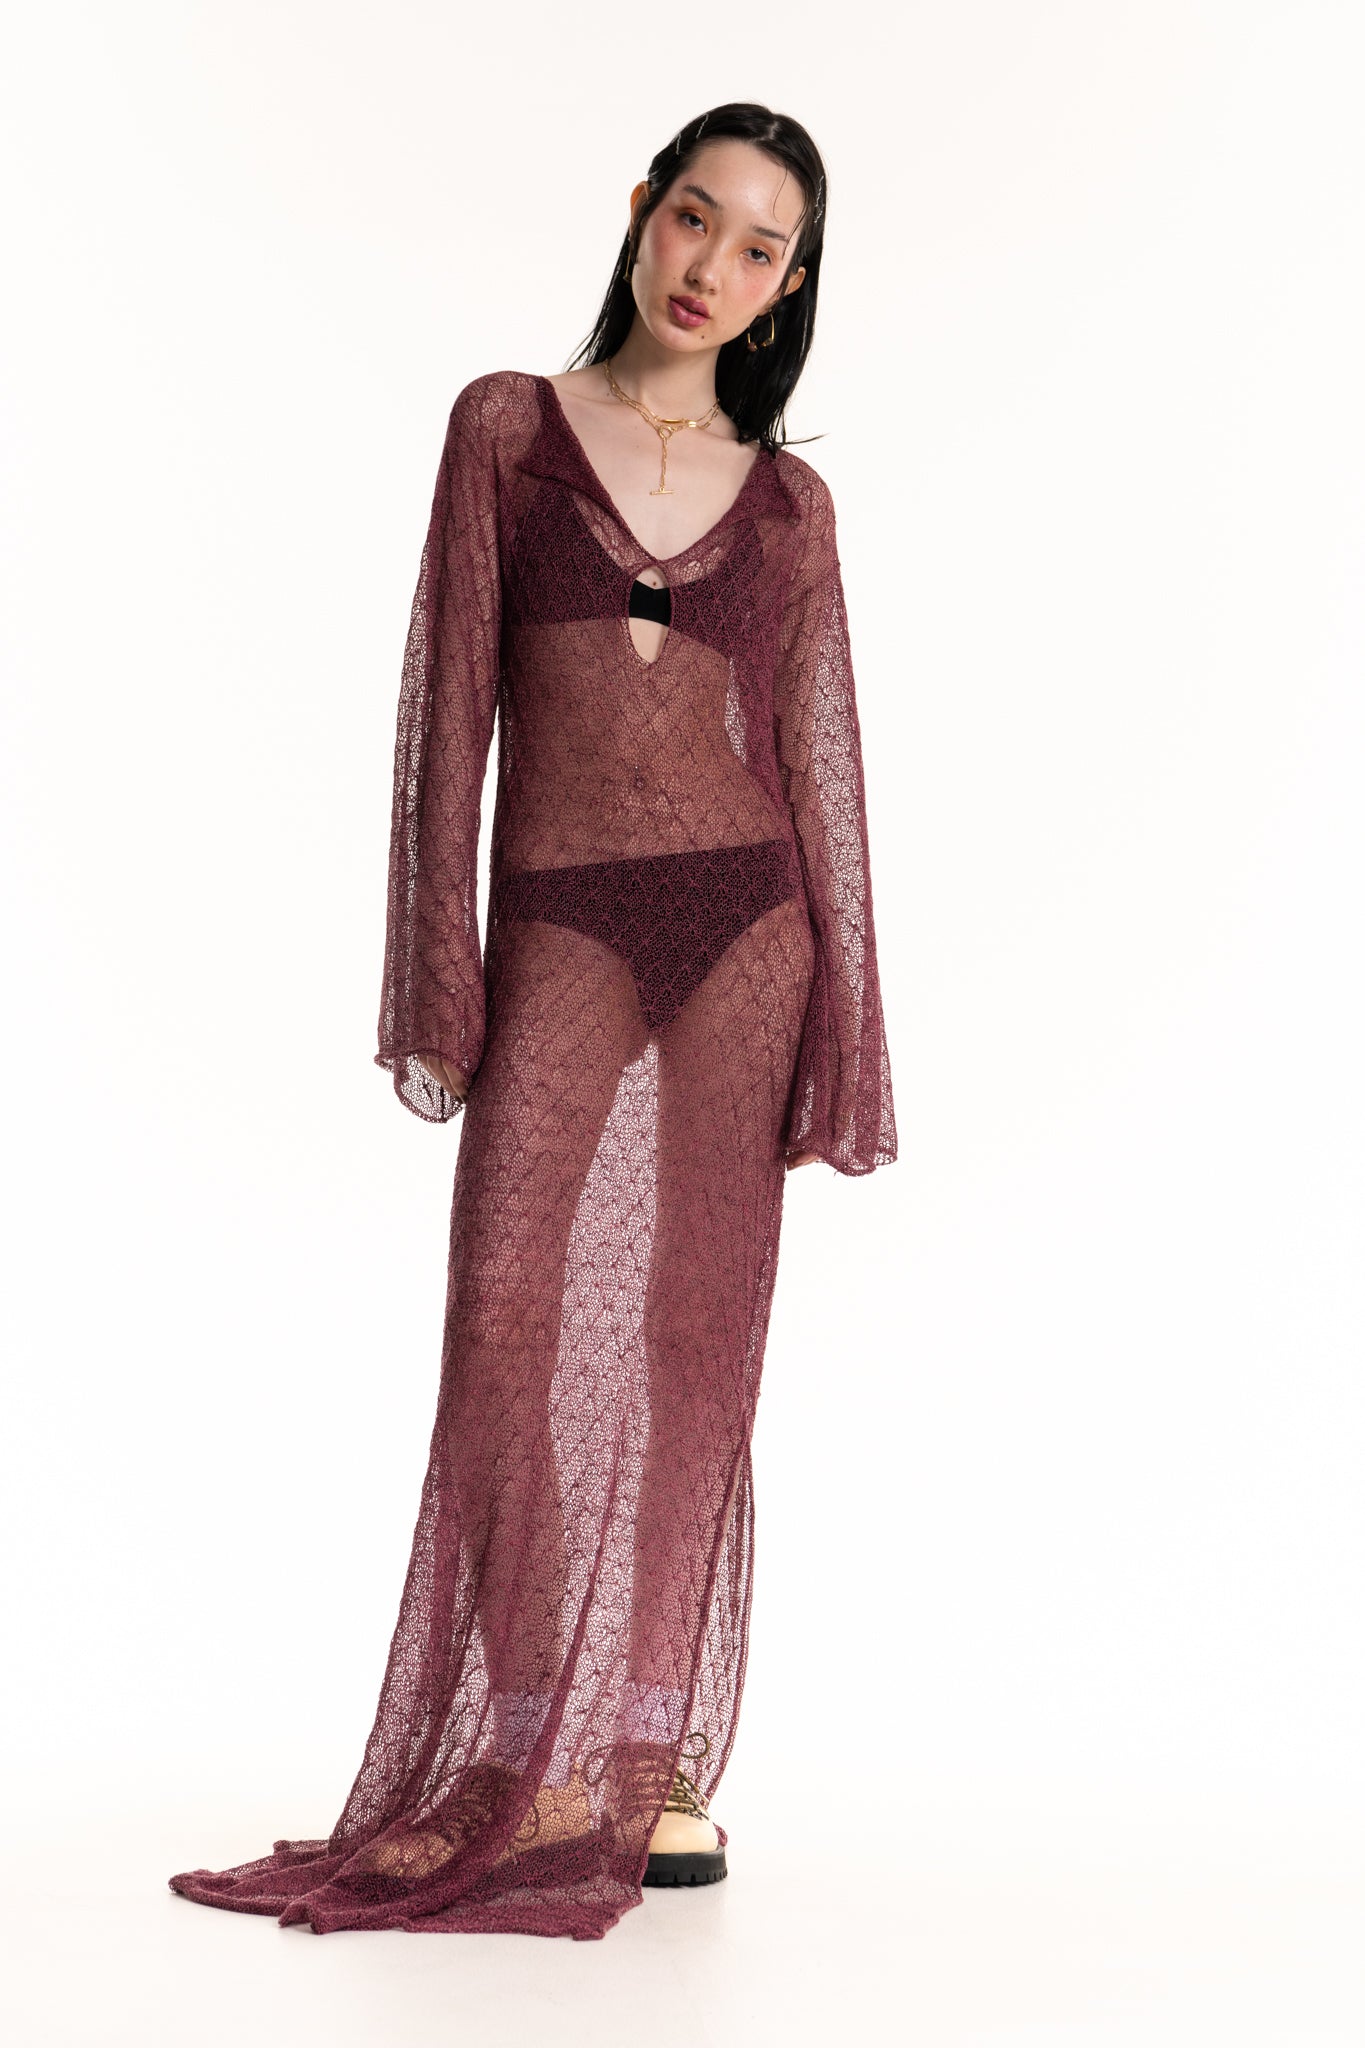 Tuck-Lace Sheer Knit Gown - heyzoemay